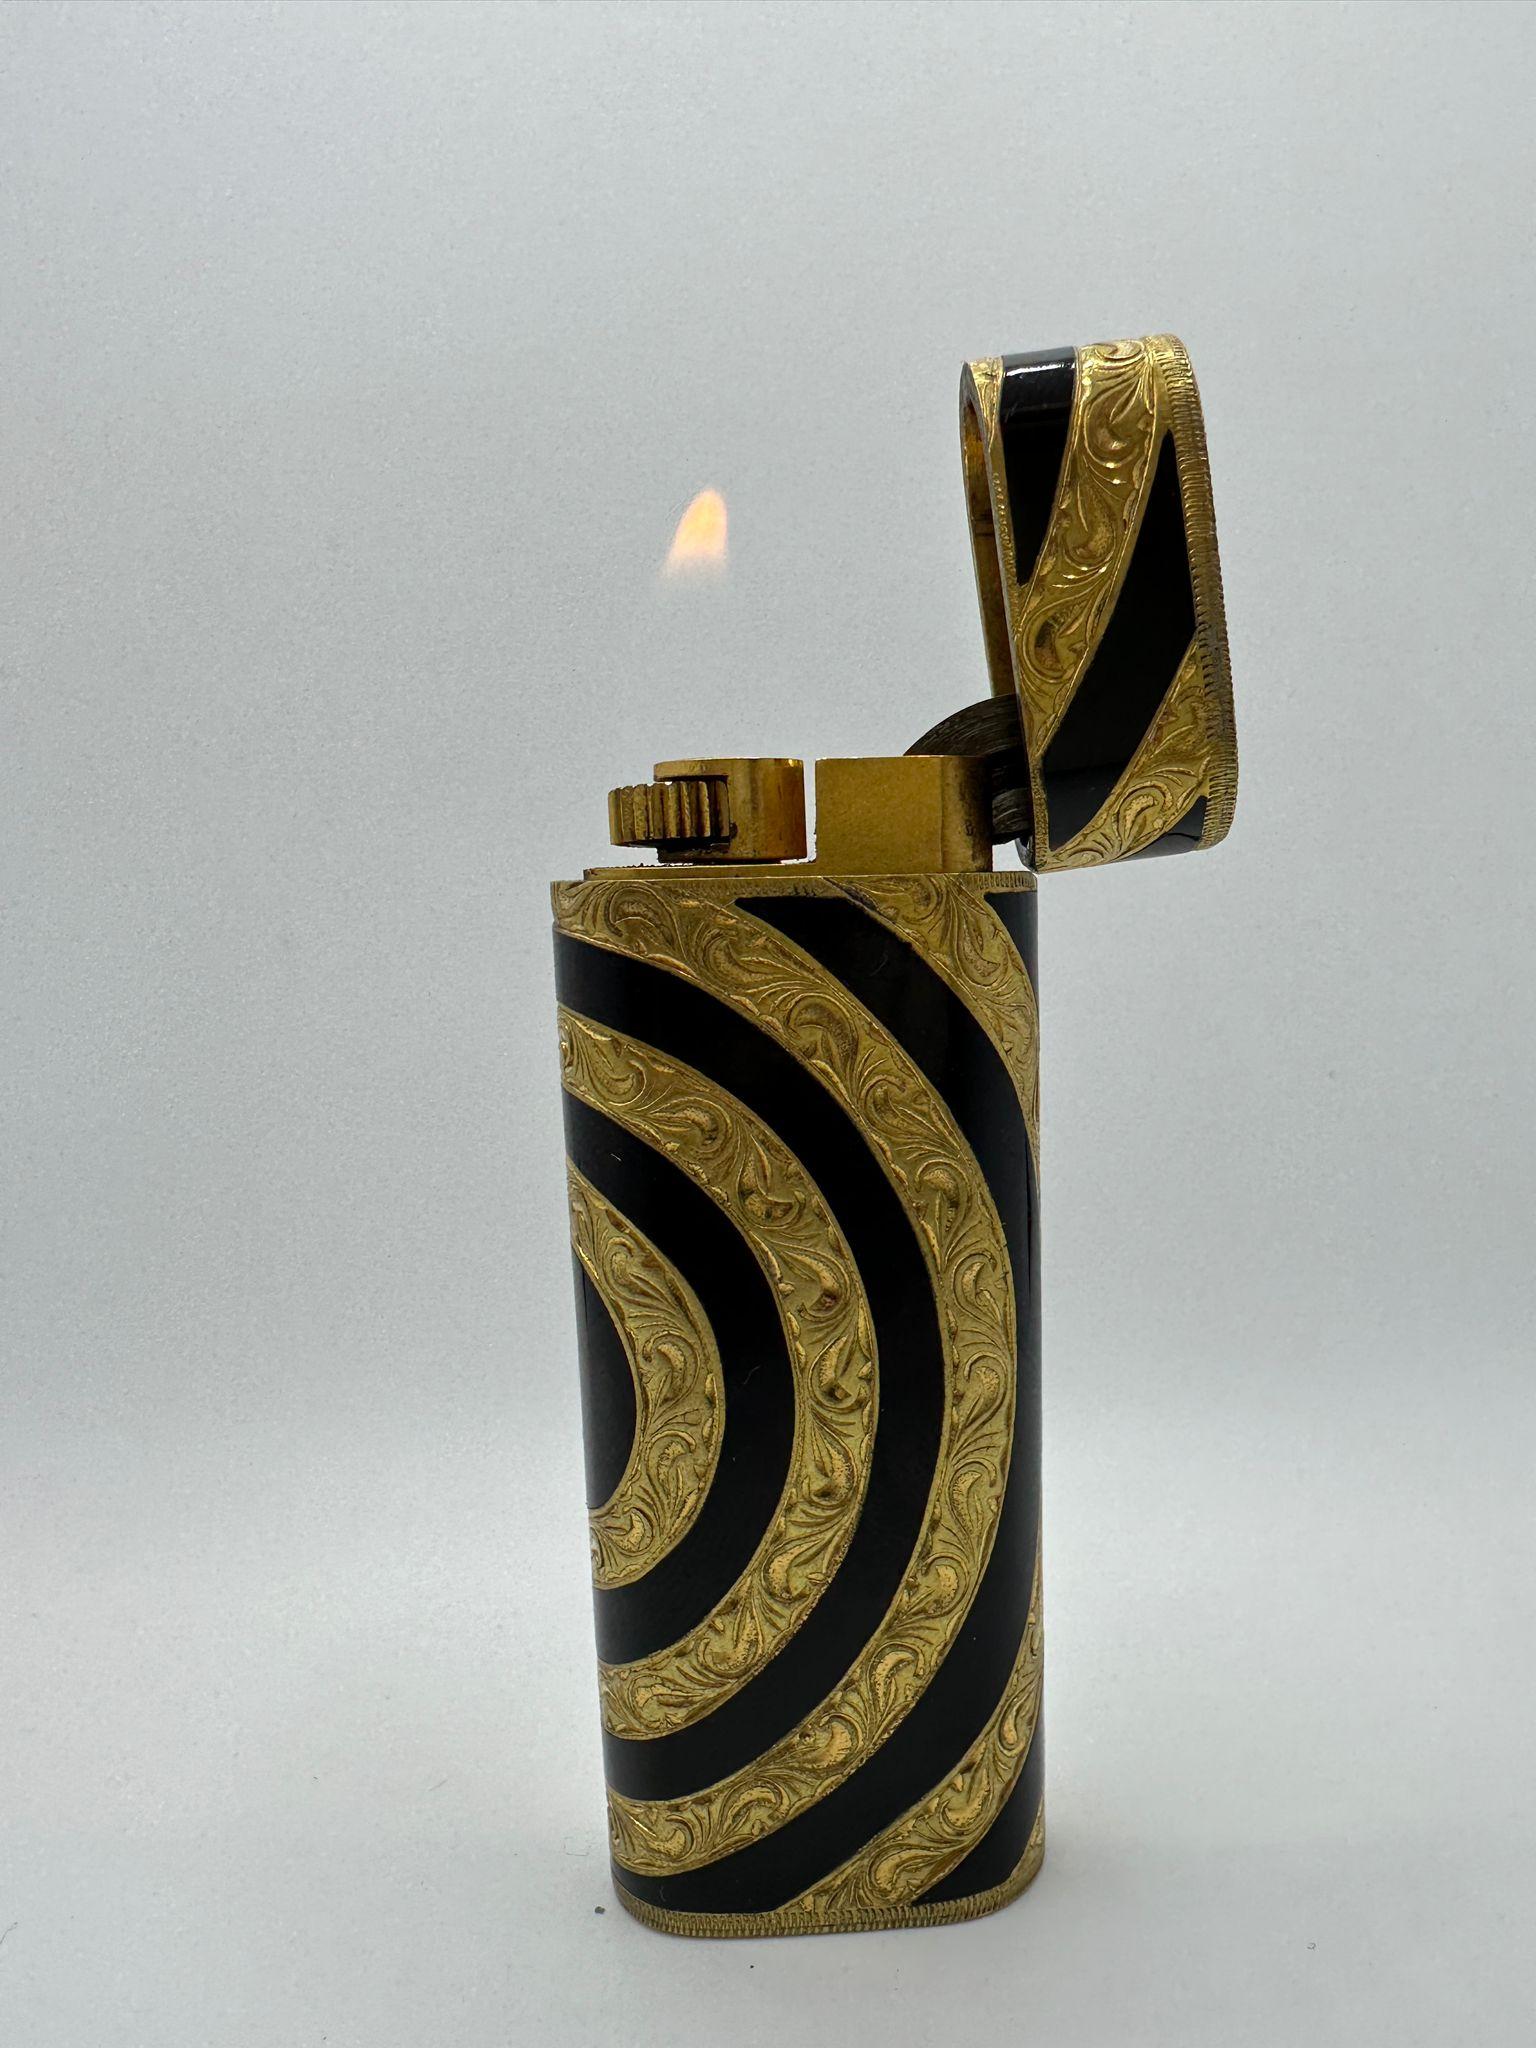 Vintage Exclusive Cartier Roy King Rollagas Lighter
Rare and Retro. 
Black enamel and Gold. 
Vintage. 
Ignites, sparks and flames. 
In mint working condition. 
Does not come with a box. 
It is gift rapped.
